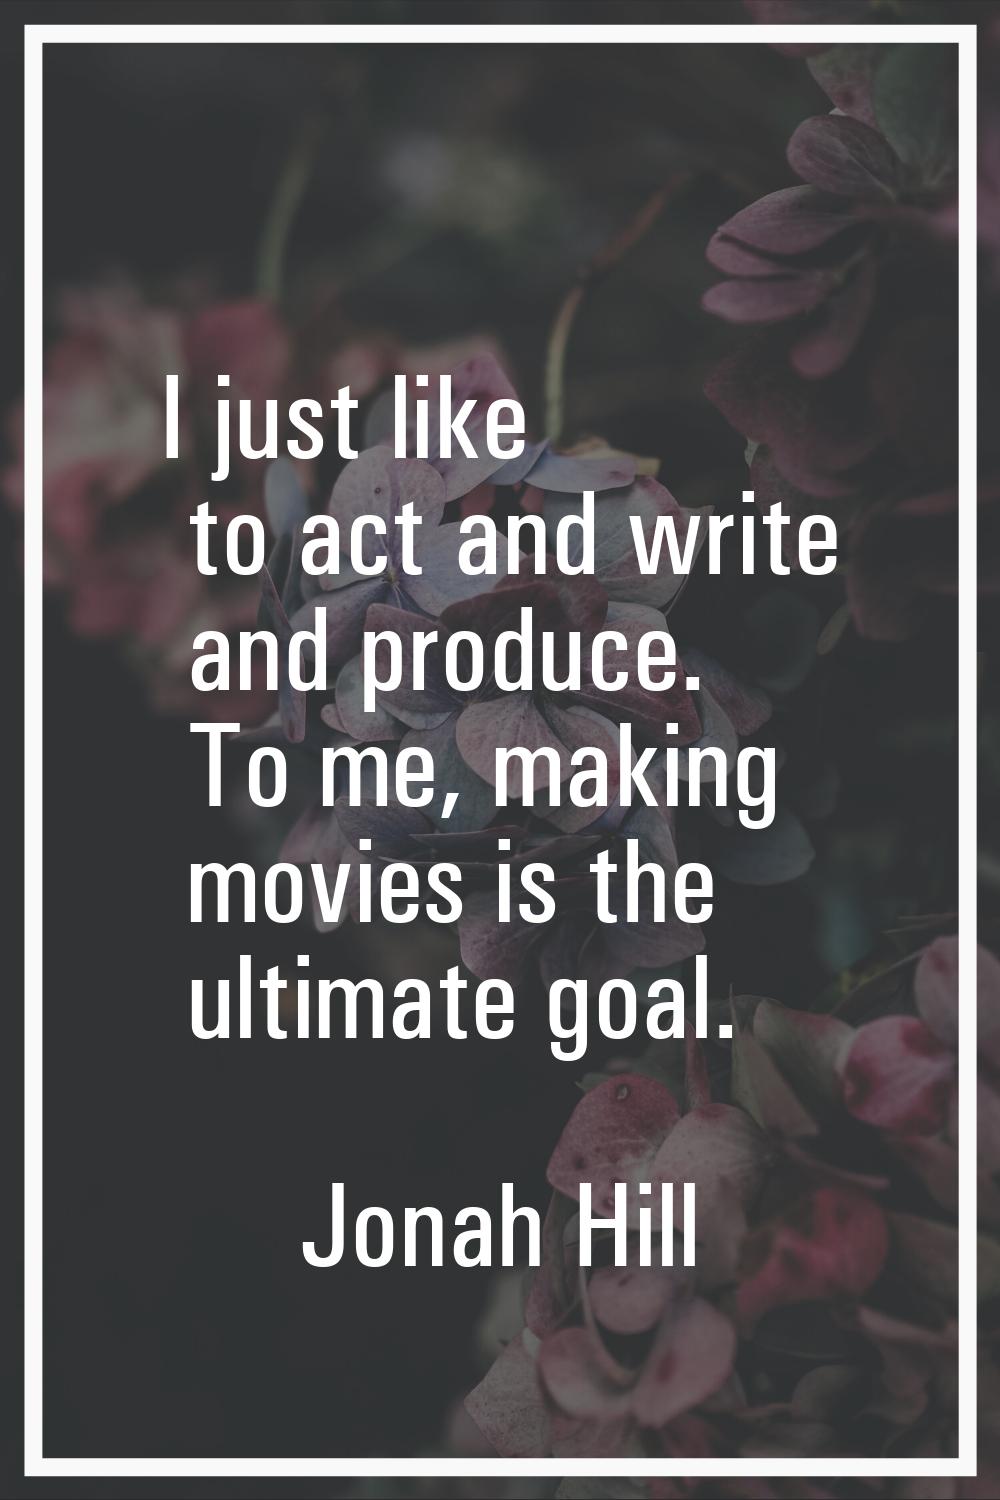 I just like to act and write and produce. To me, making movies is the ultimate goal.